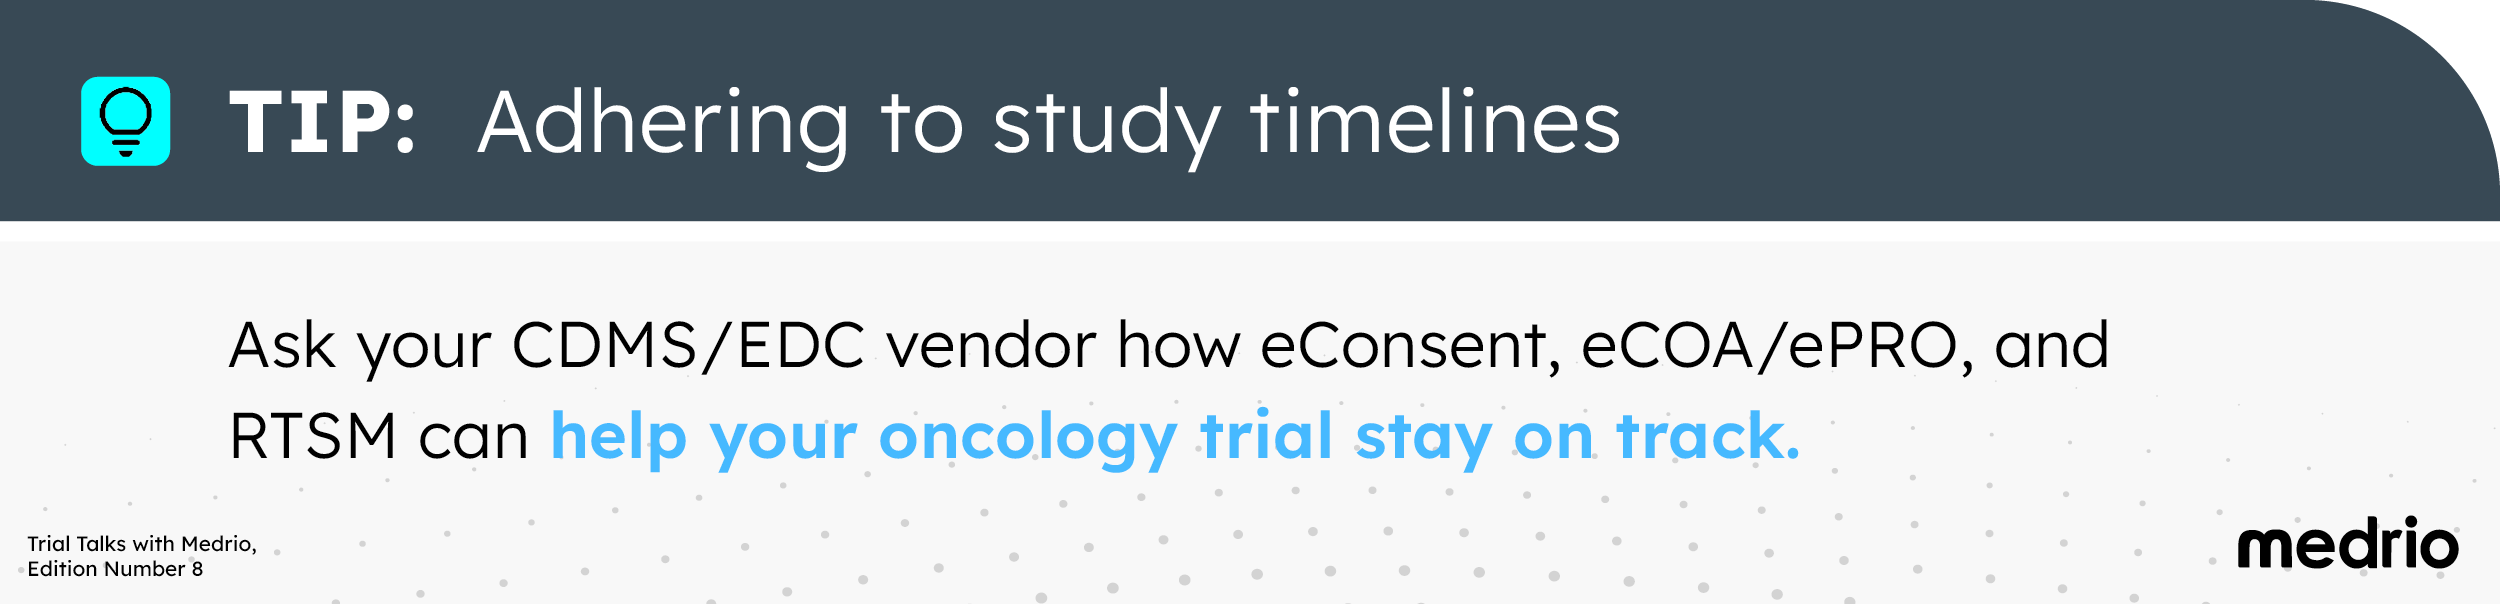 [Image] Tip for adhering to study timelines - Ask your CDMS/EDC vendor how eConsent, eCOA/ePRO, and RTSM can help your oncology trial stay on track.